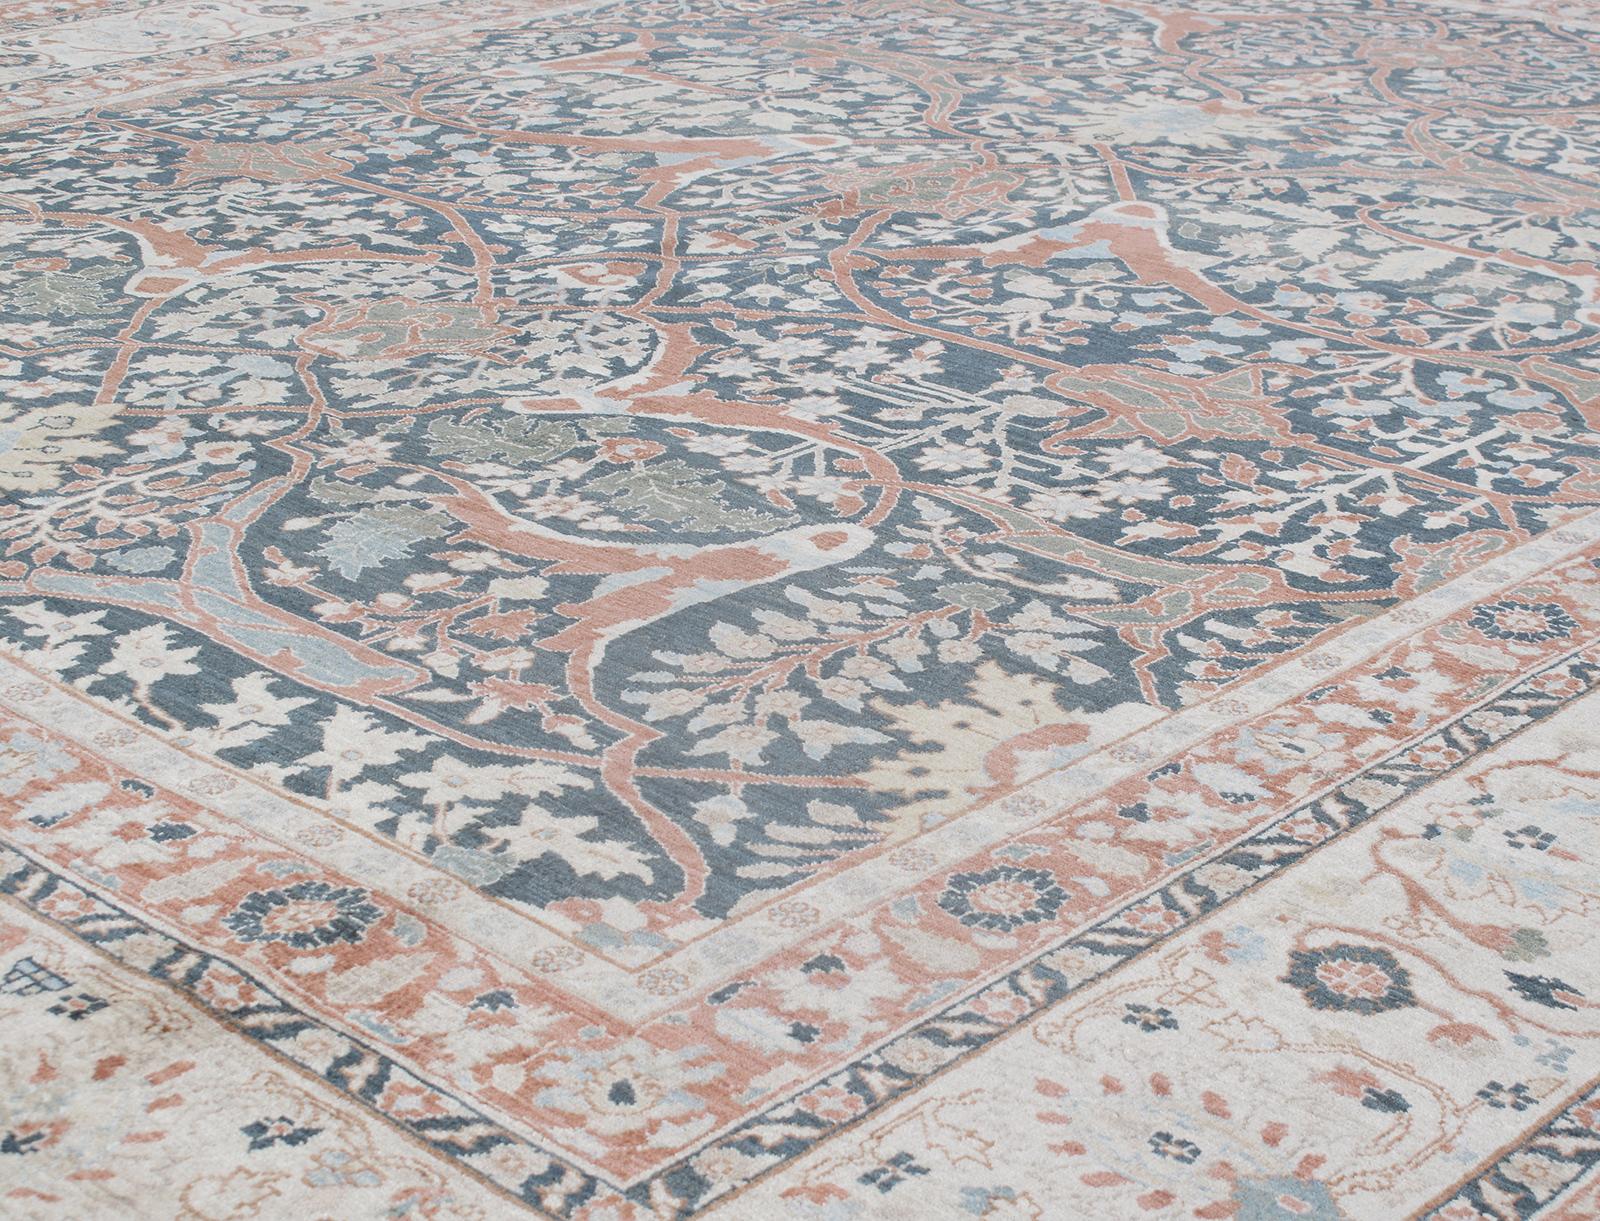 This Persian Tabriz hand-knotted rug is made from the finest hand-carded, hand-spun wool and distinguished by its excellent weave, and by the remarkable adherence to the classical traditions of Persian rug design. The city of Tabriz, in northwest